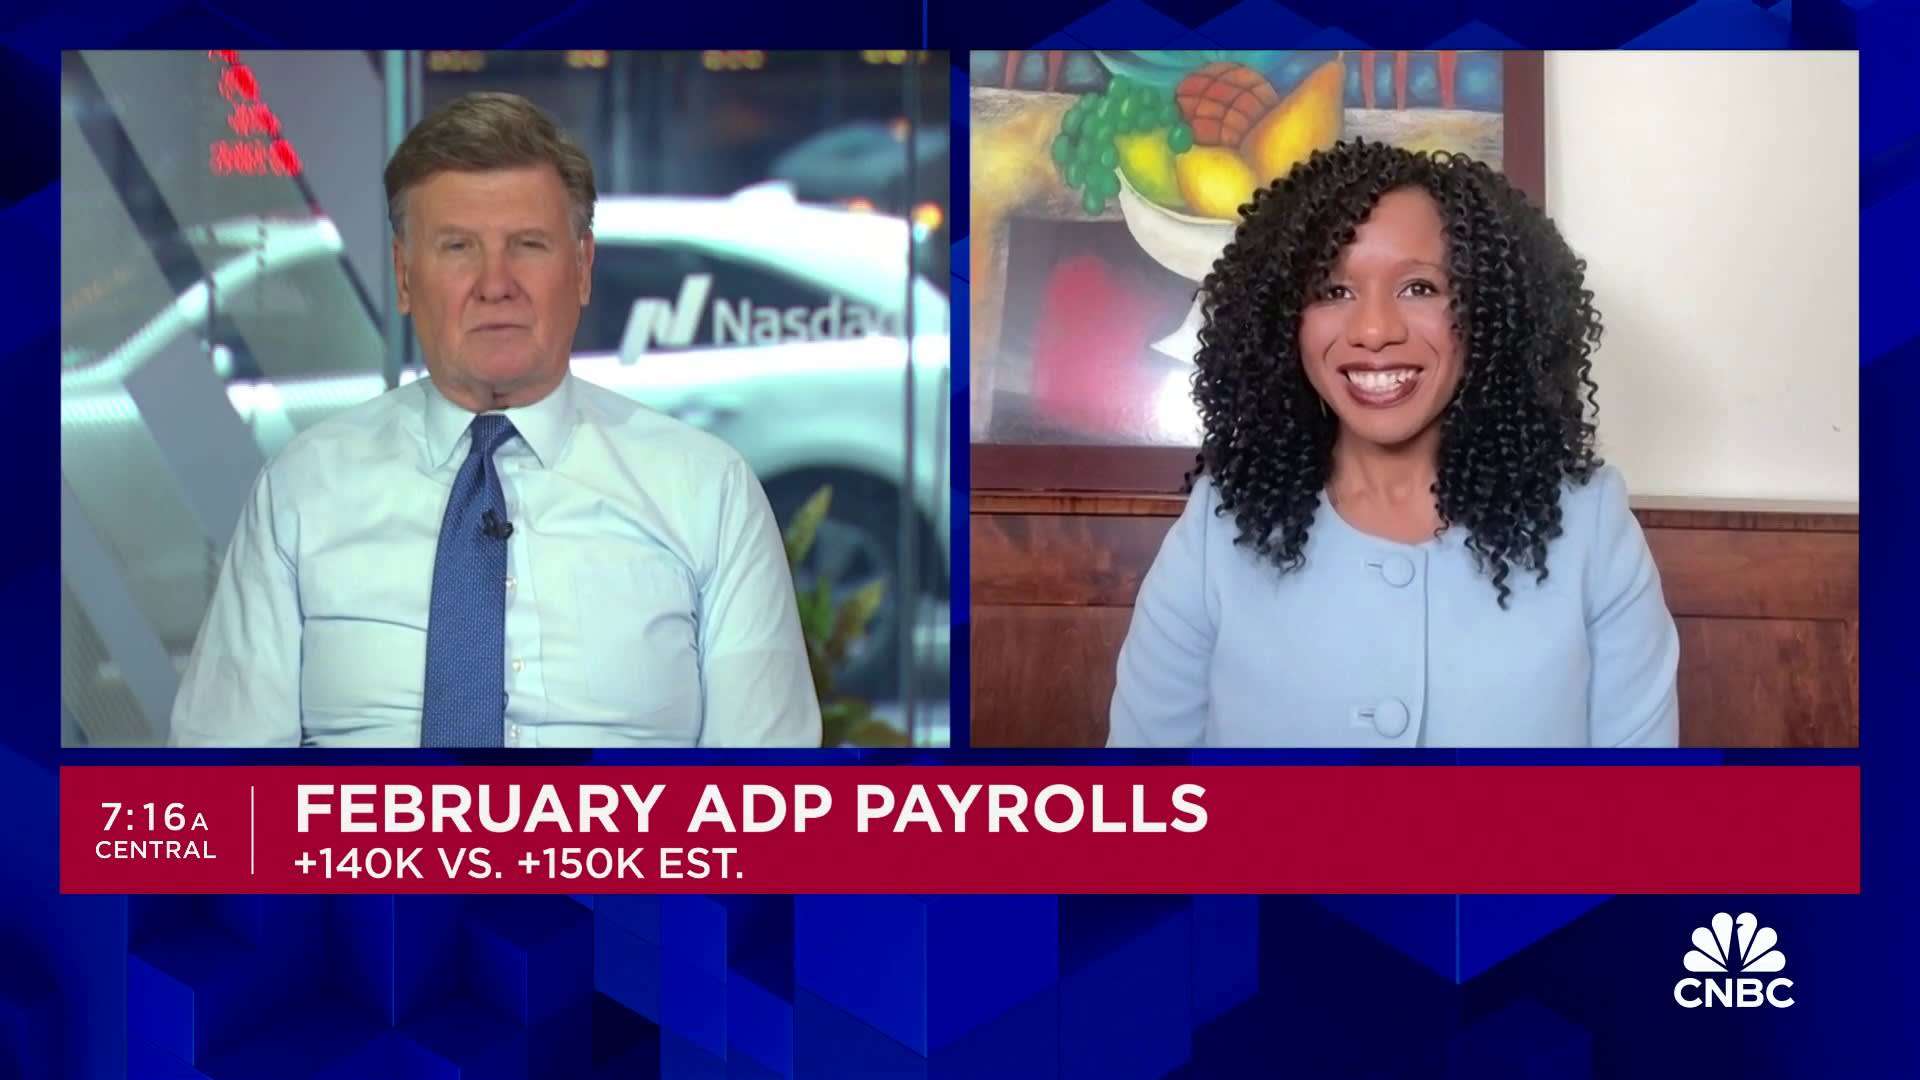 Private payrolls rose by 140,000 in February, less than expected, ADP reports